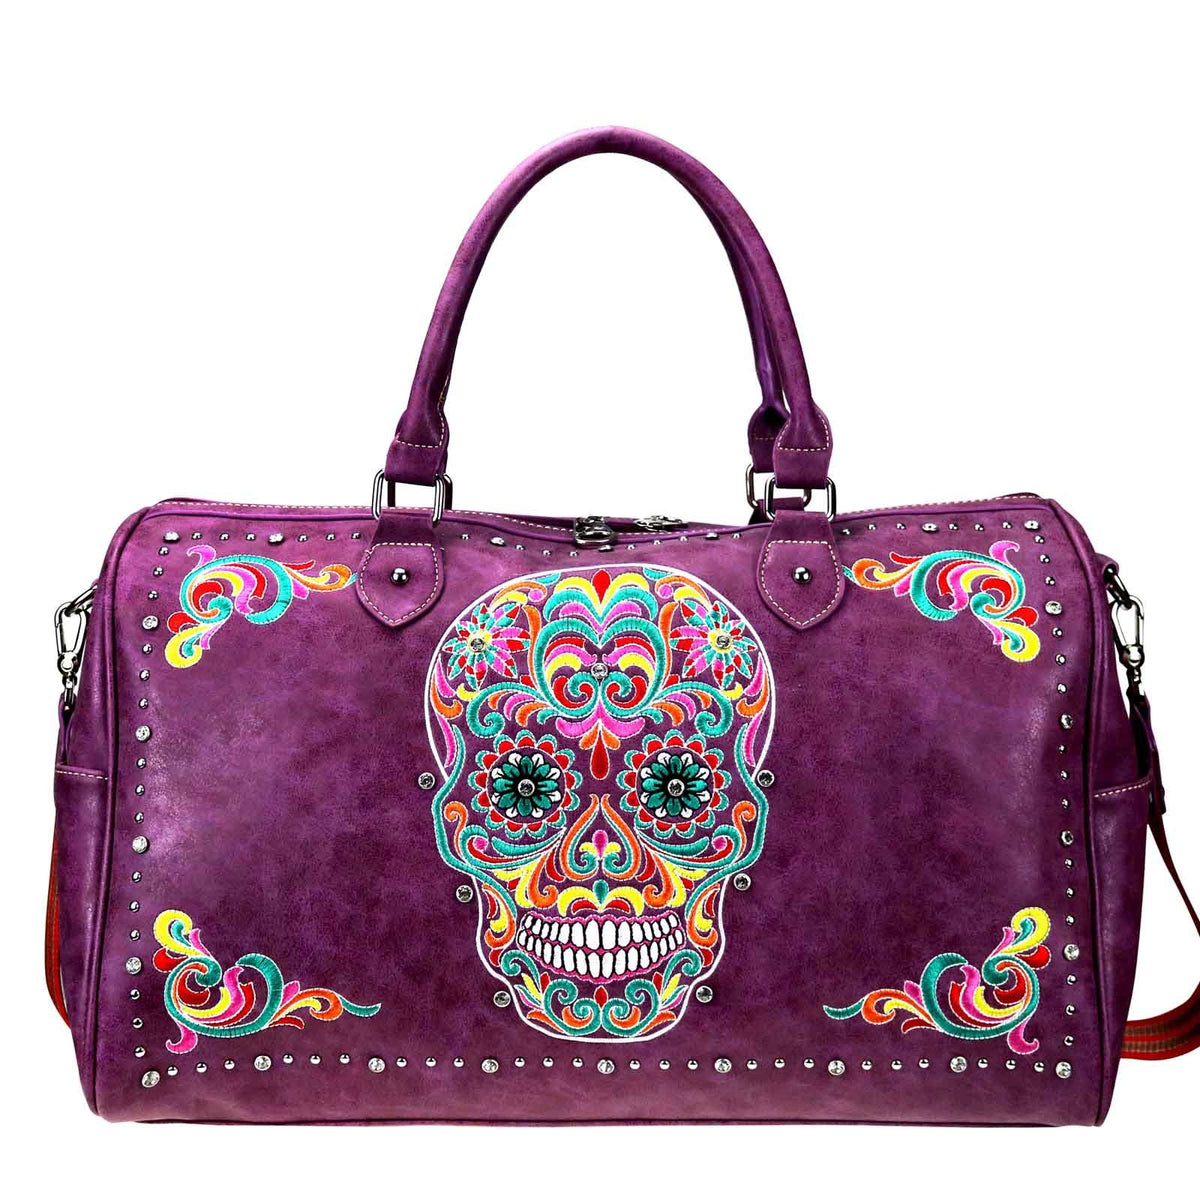 Embroidered Sugar Skull Duffle Bag:  Vibrant embroidered Sugar Skull   Accented with silver and crystal studs Top zippered closure An open pocket on each side with button closure Interior includes a zippered pocket and 2 open pockets  Metal feet on the bottom for protection and stability Detachable/adjustable shoulder strap Double handle 20" x 8" x 12.5" Double Handle Drop 6" Adjustable Strap Drop 18"